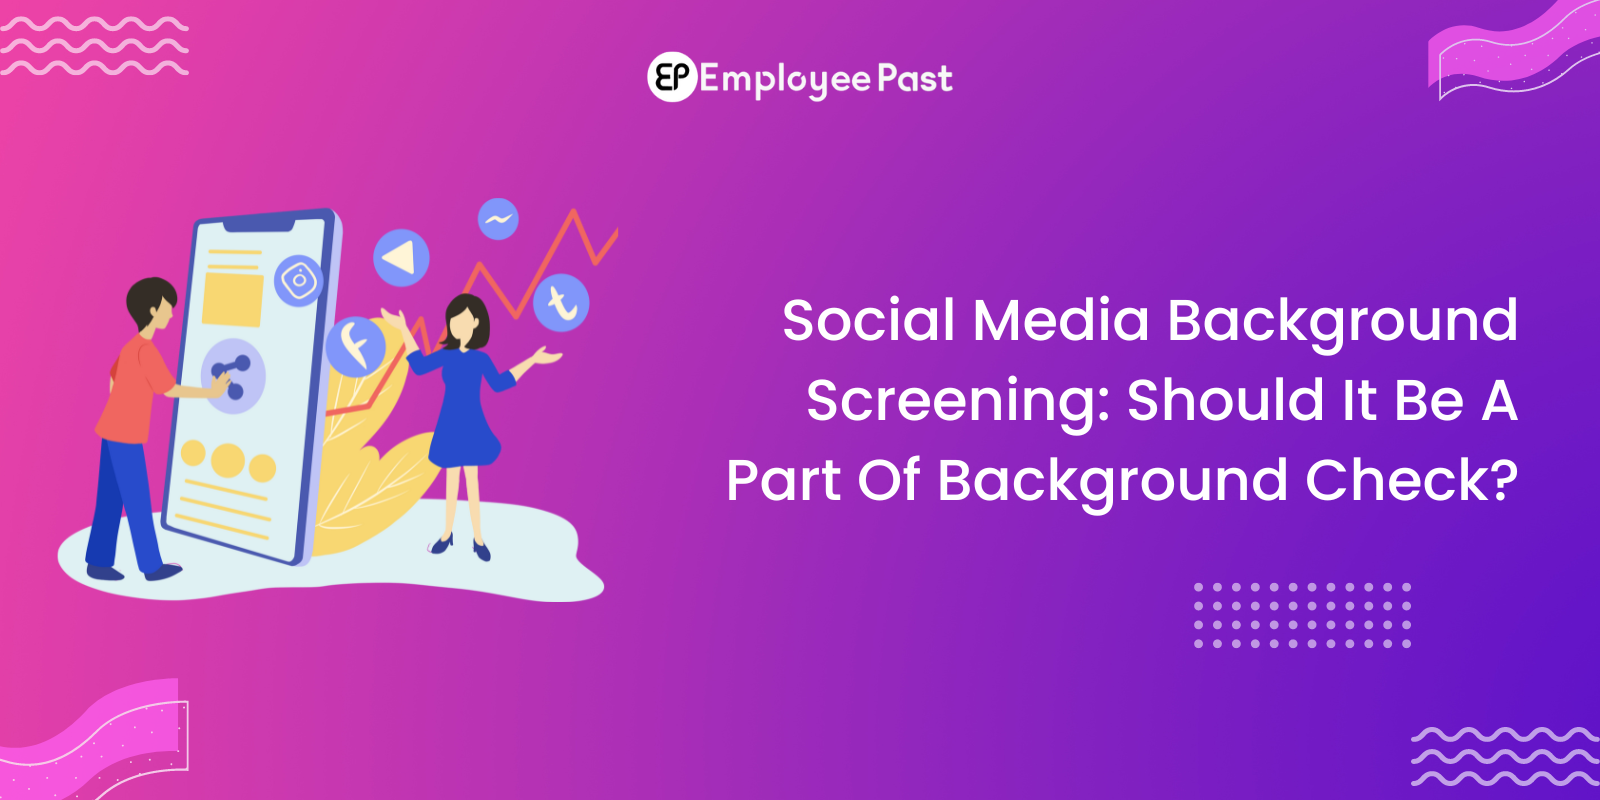 Social Media Background Screening: Should It Be A Part Of Background Check?